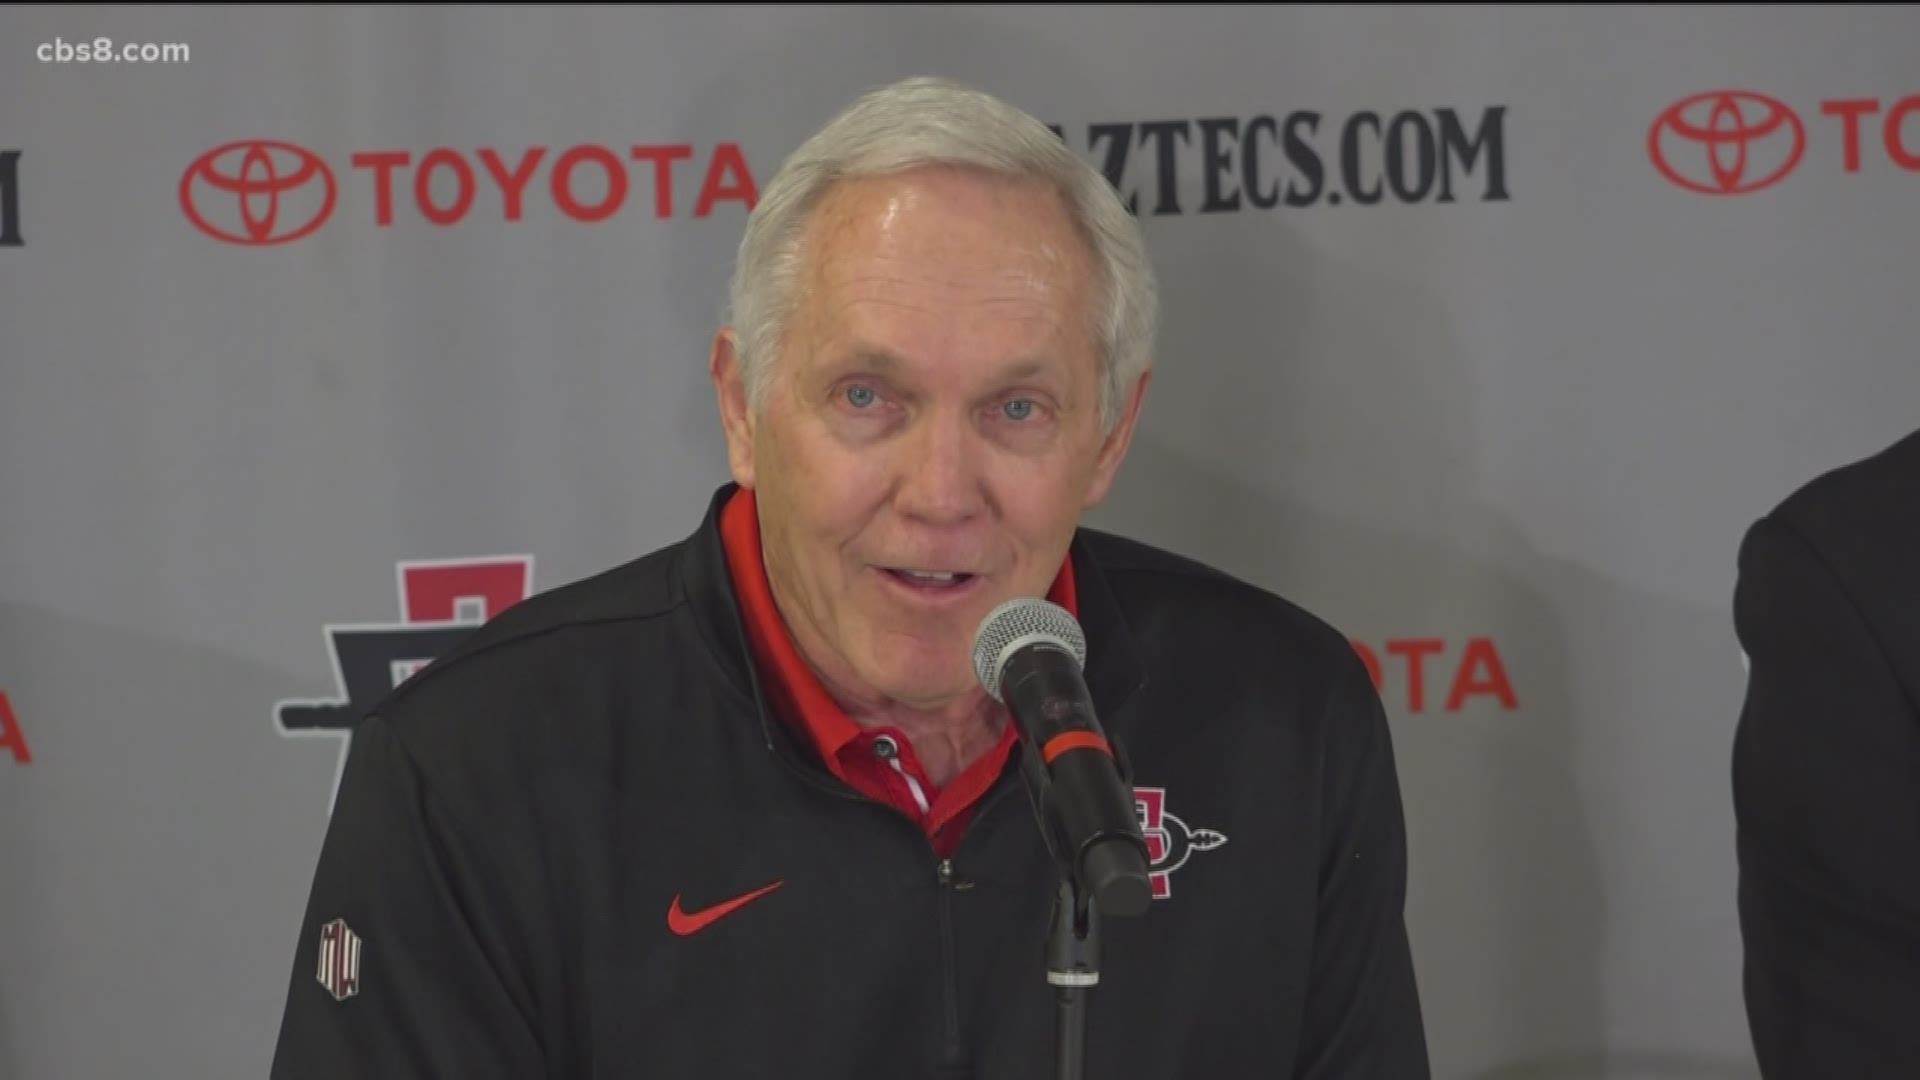 Rocky Long is retiring after 9 years as the head of the Aztecs football program.